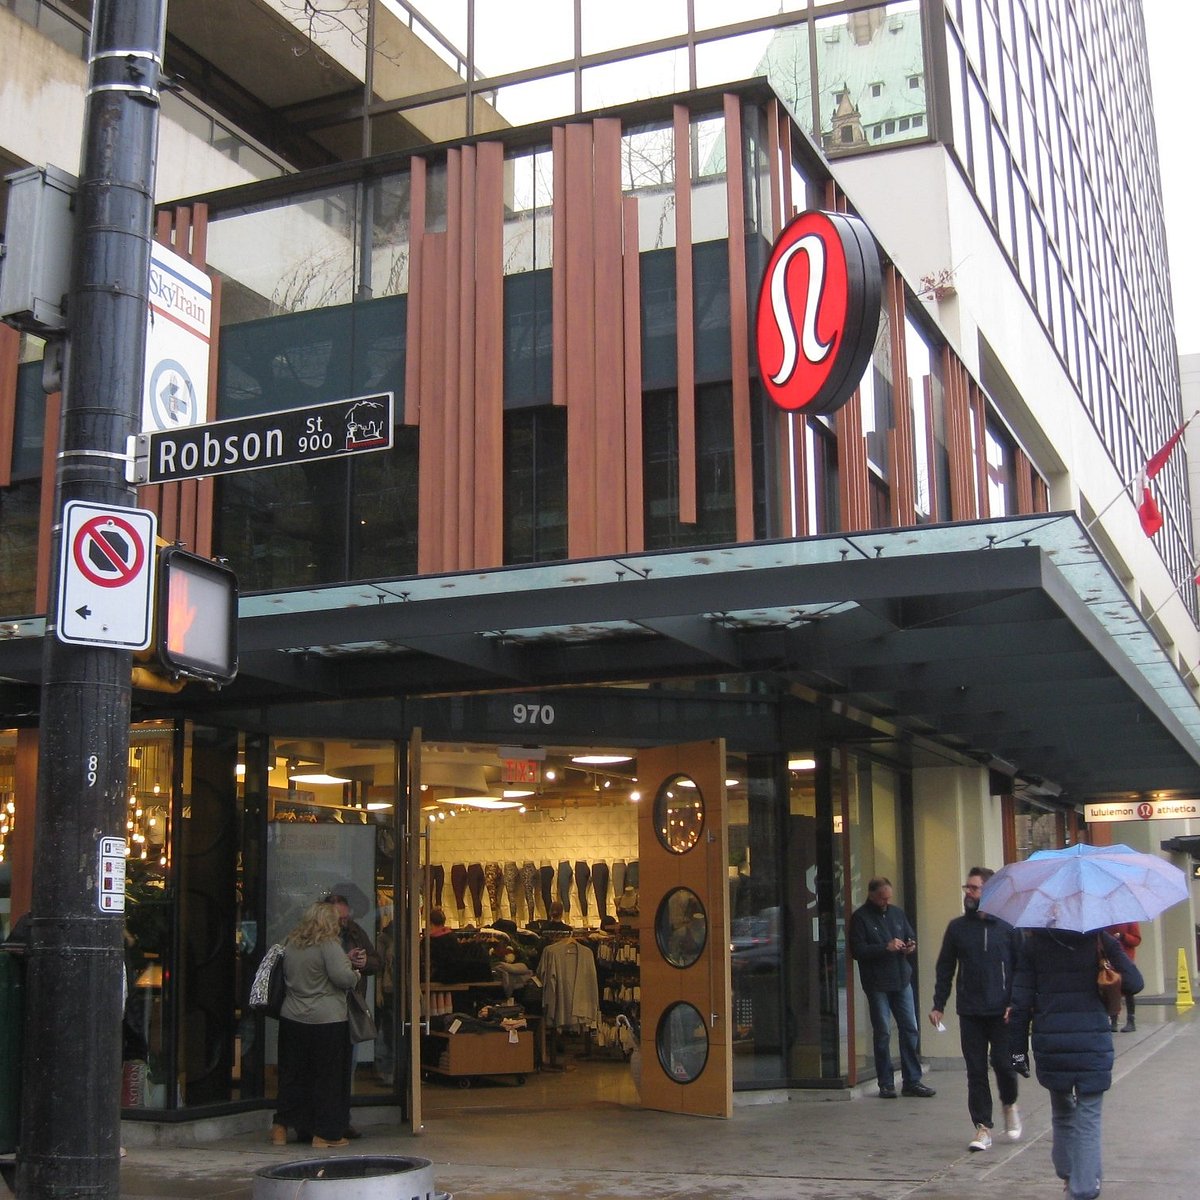 Photos: Lululemon unveils revamp of first location in Vancouver's